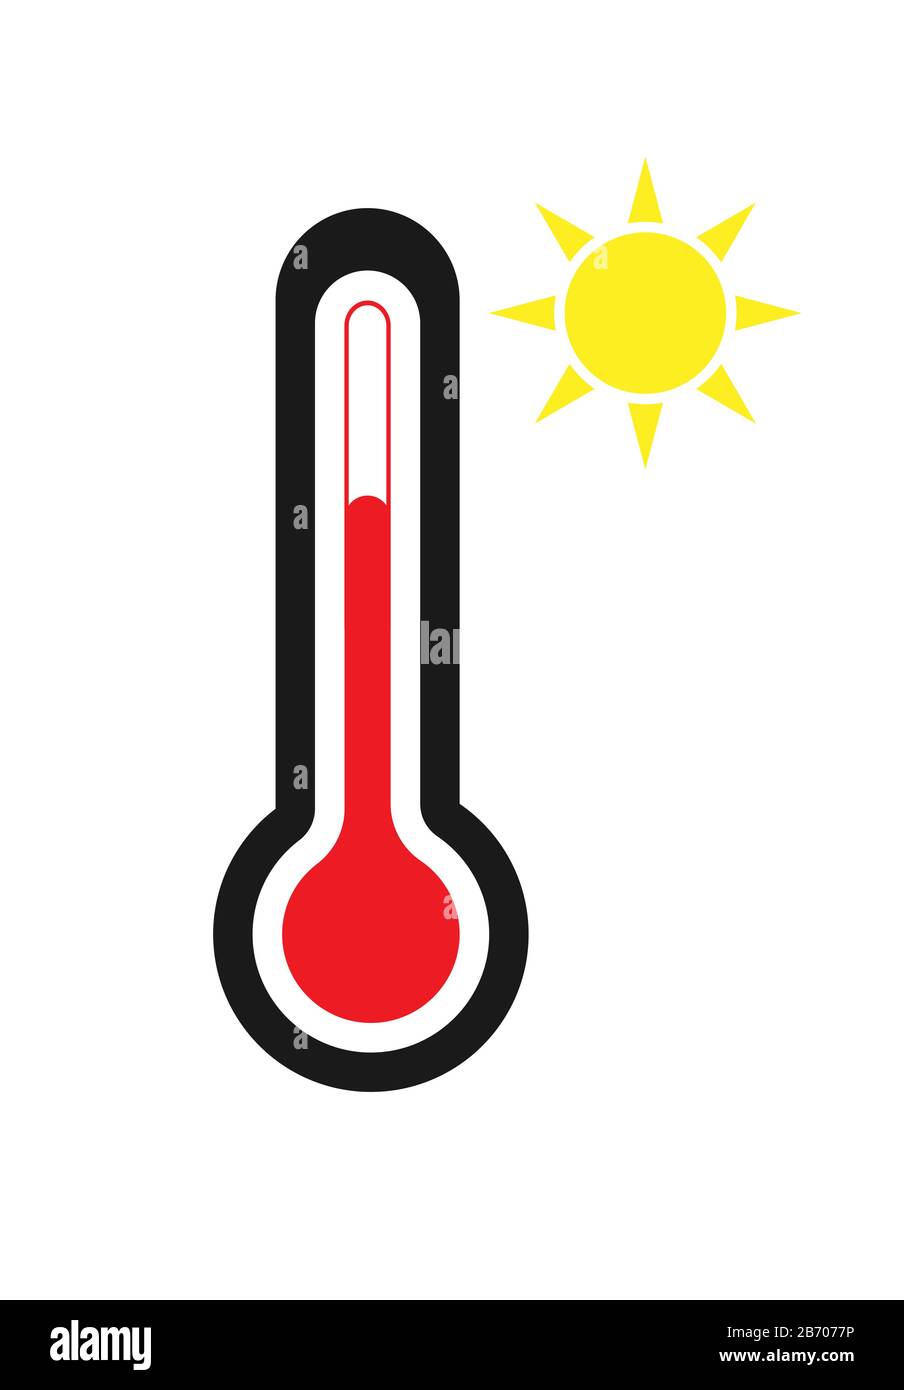 https://c8.alamy.com/comp/2B7077P/vector-thermometer-icon-with-sun-icon-warm-weather-temperature-sensor-simple-flat-design-for-apps-and-websites-2B7077P.jpg